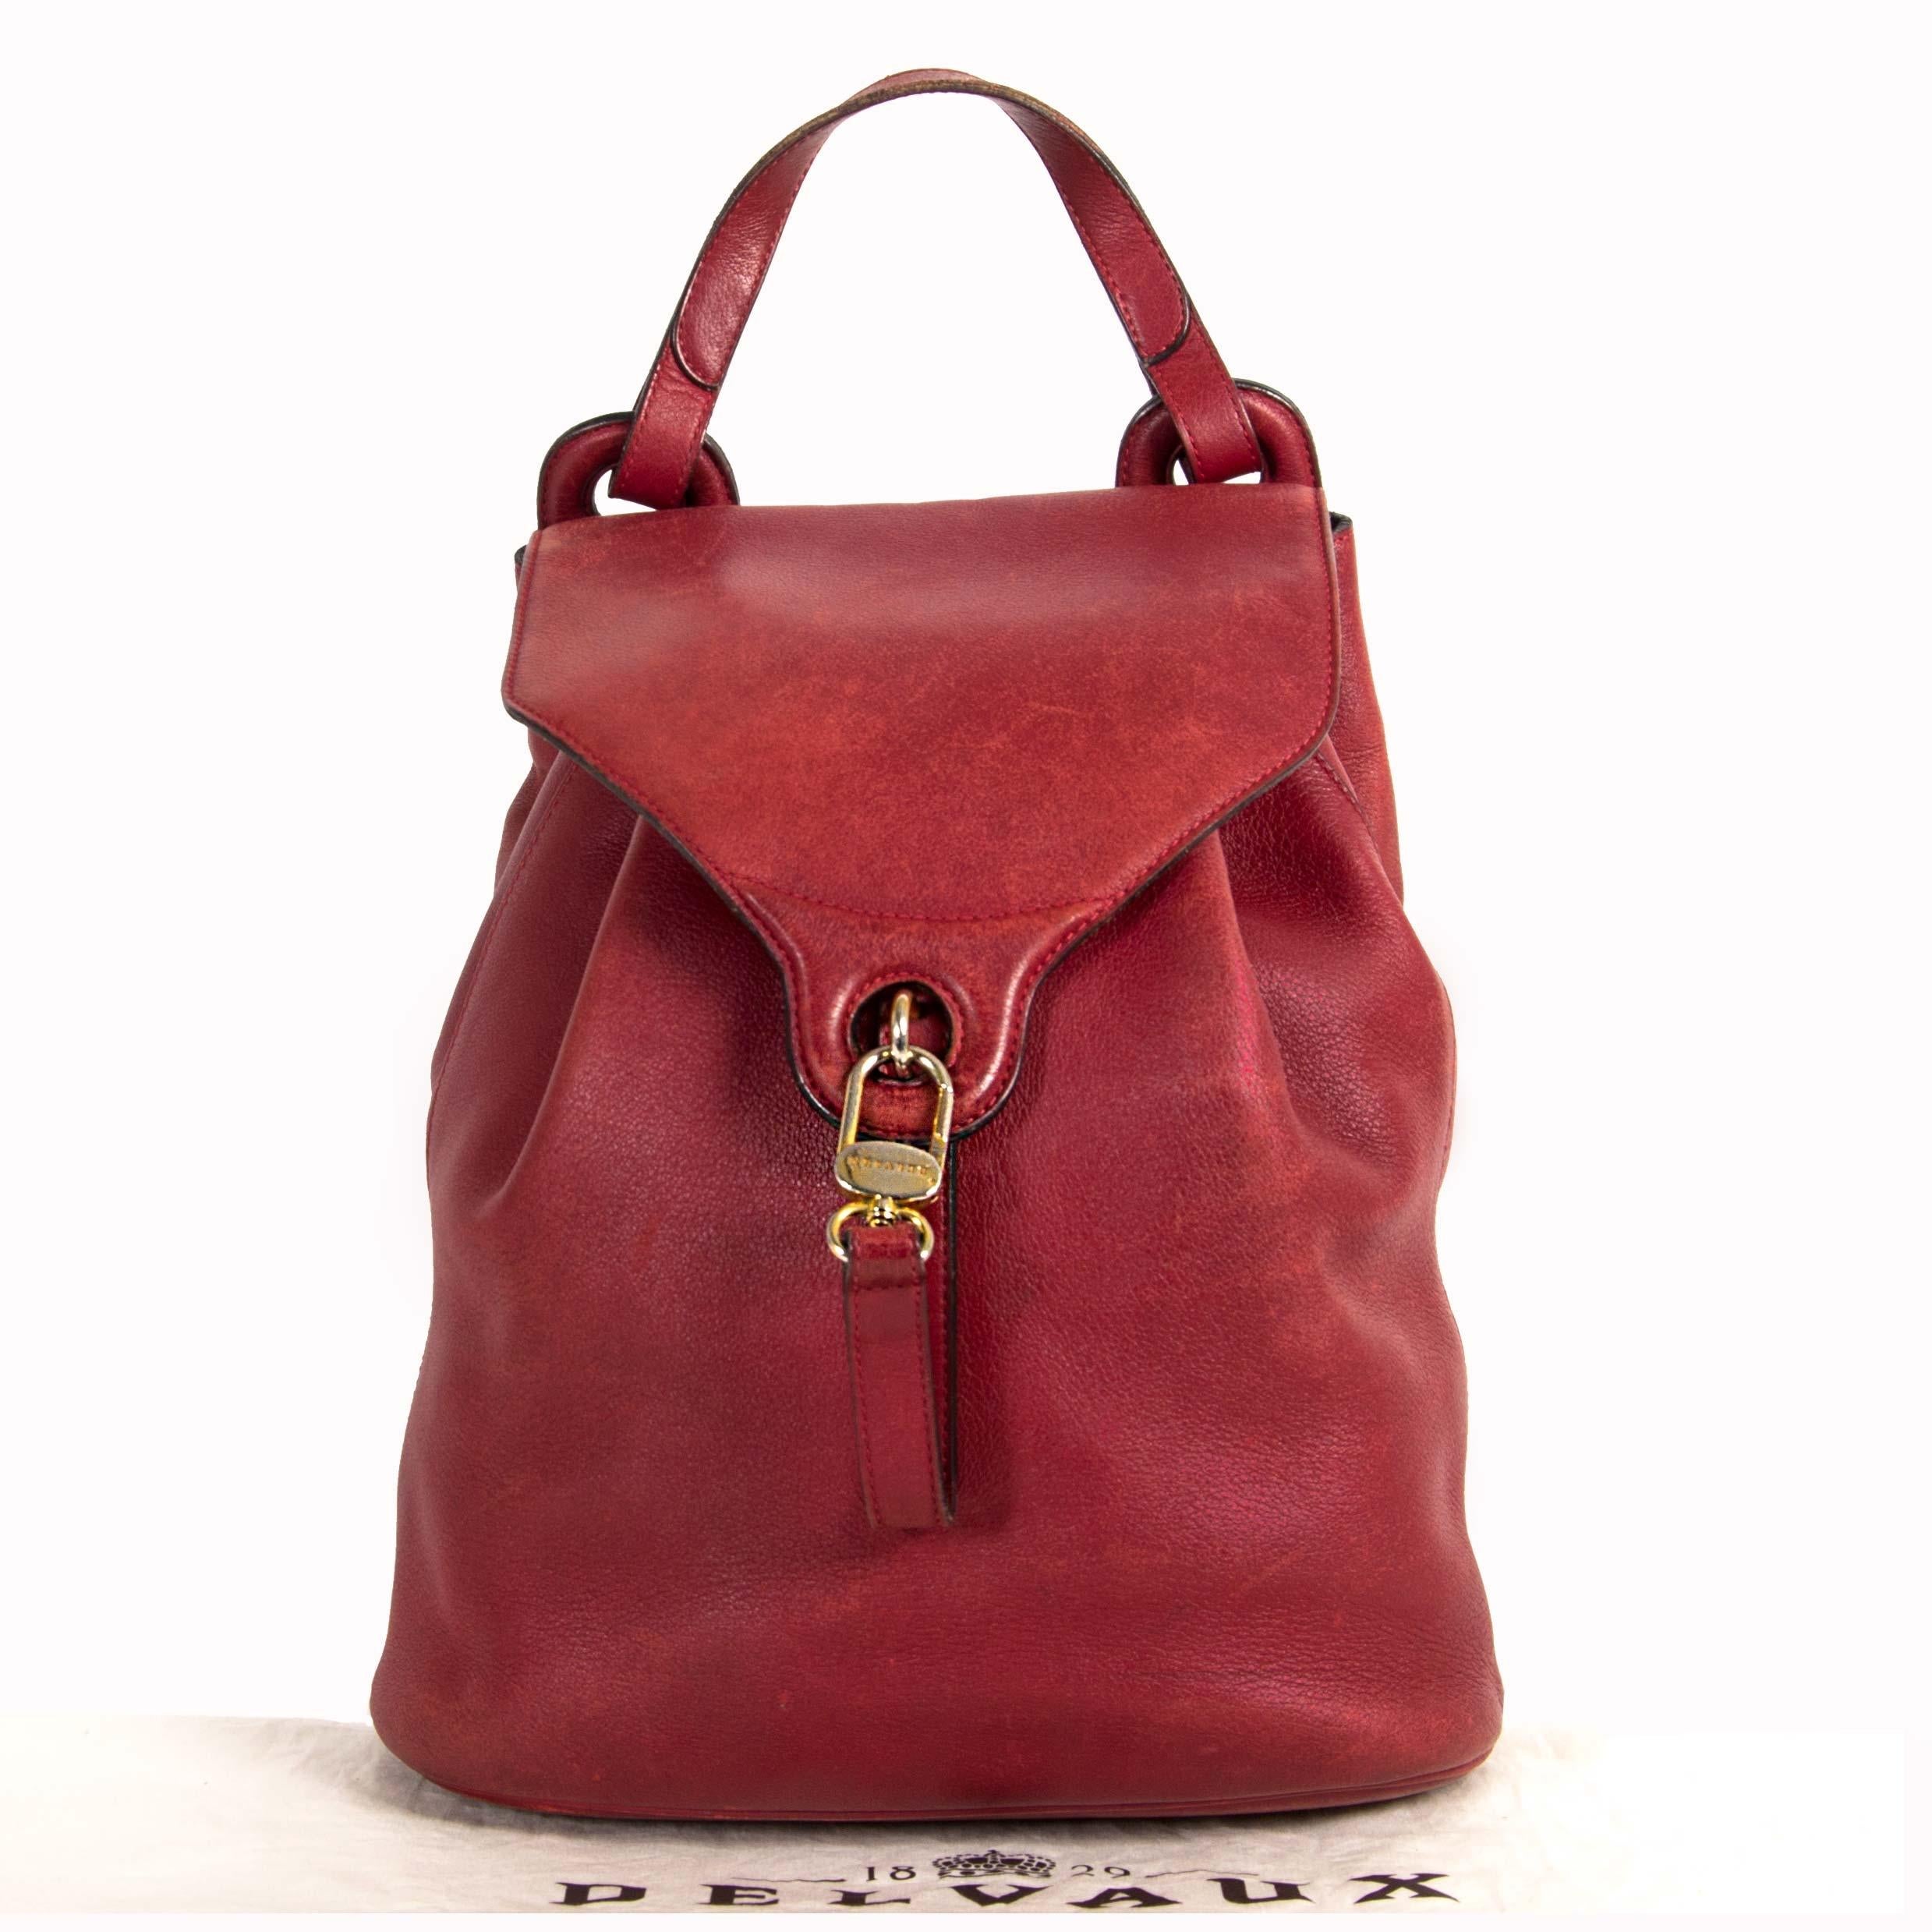 Good preloved condition

Delvaux Red Rose PM Backpack

A backpack is what you need when you are looking for a practical accessory. This Delvaux backpack features red leather and gold toned hardware. 
The bag opens at the back with a zipper. The